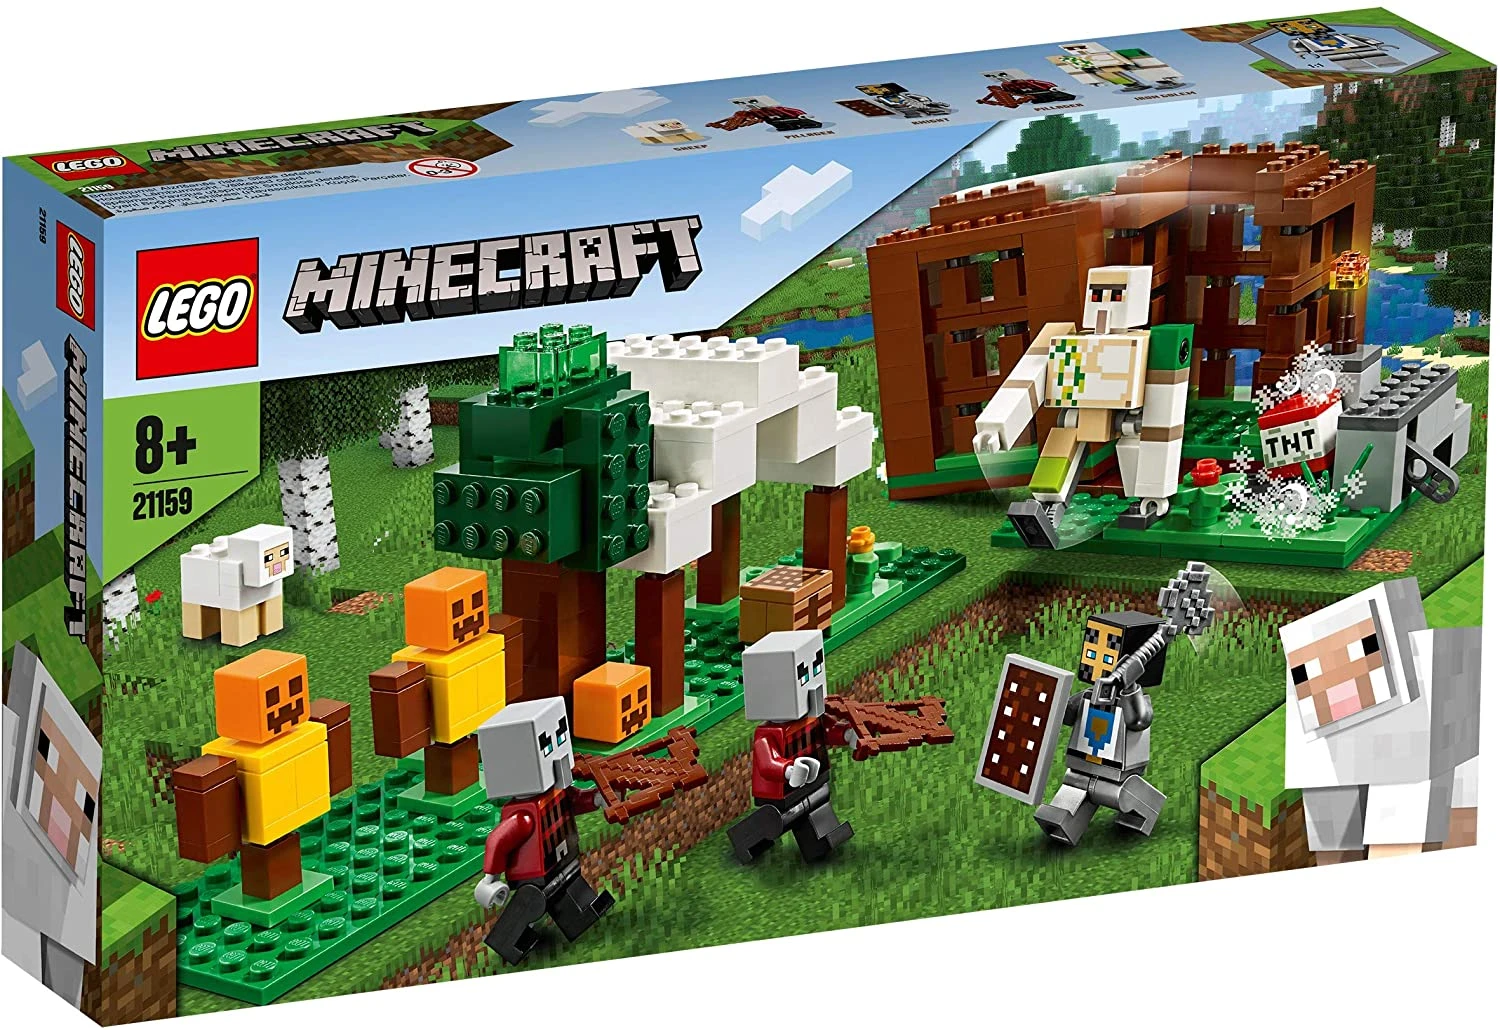 Lego Minecraft-the Post Of Looters, Toy Construction To Recreate The  Adventures Of The Game, 21159 1028713 - Card Model Building Sets -  AliExpress